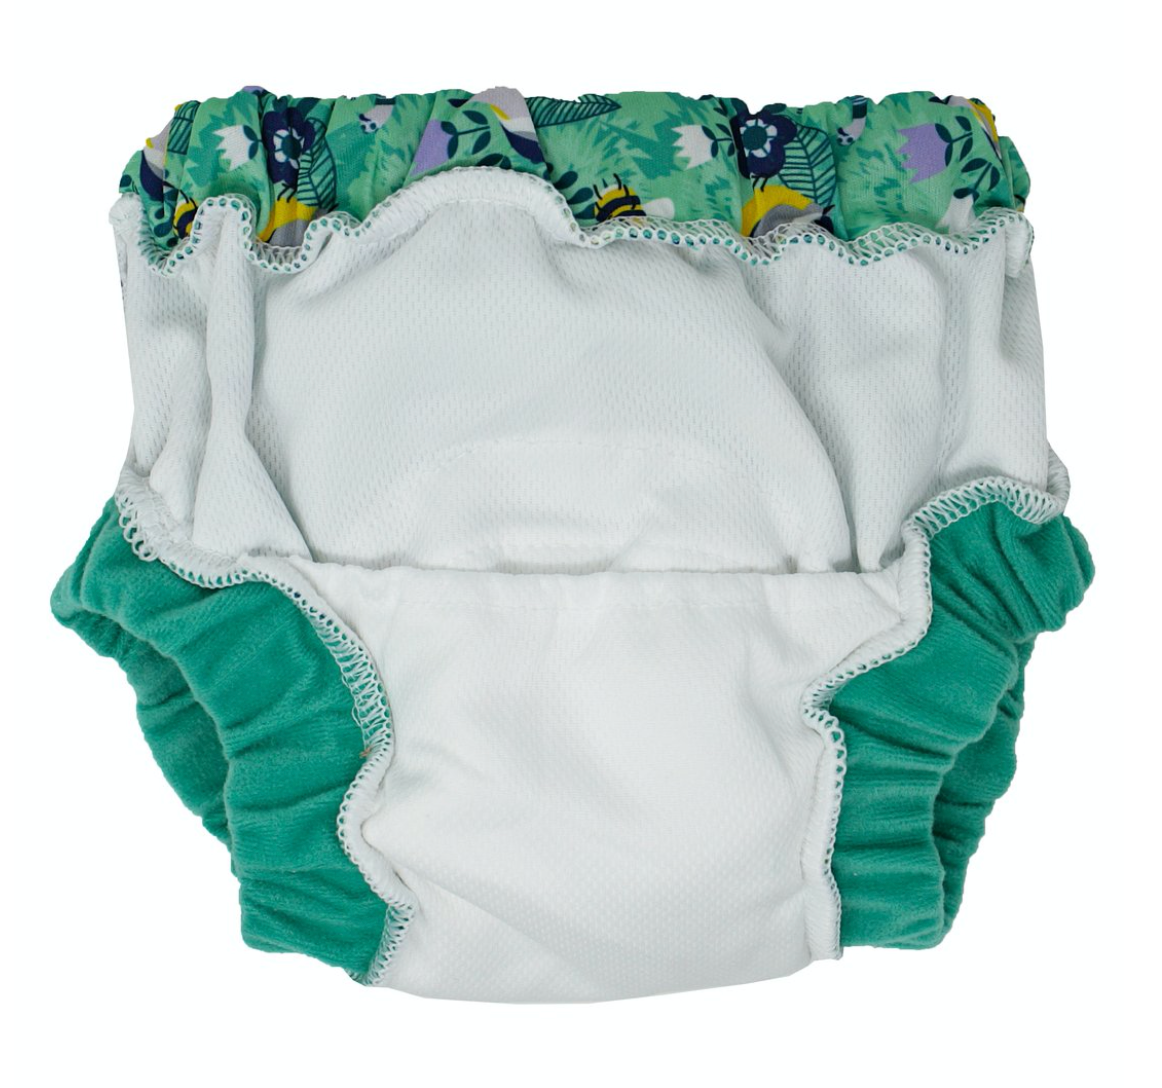 Training Pants | Buy Cloth Training Diapers From the Online Leader -  Nicki's Diapers